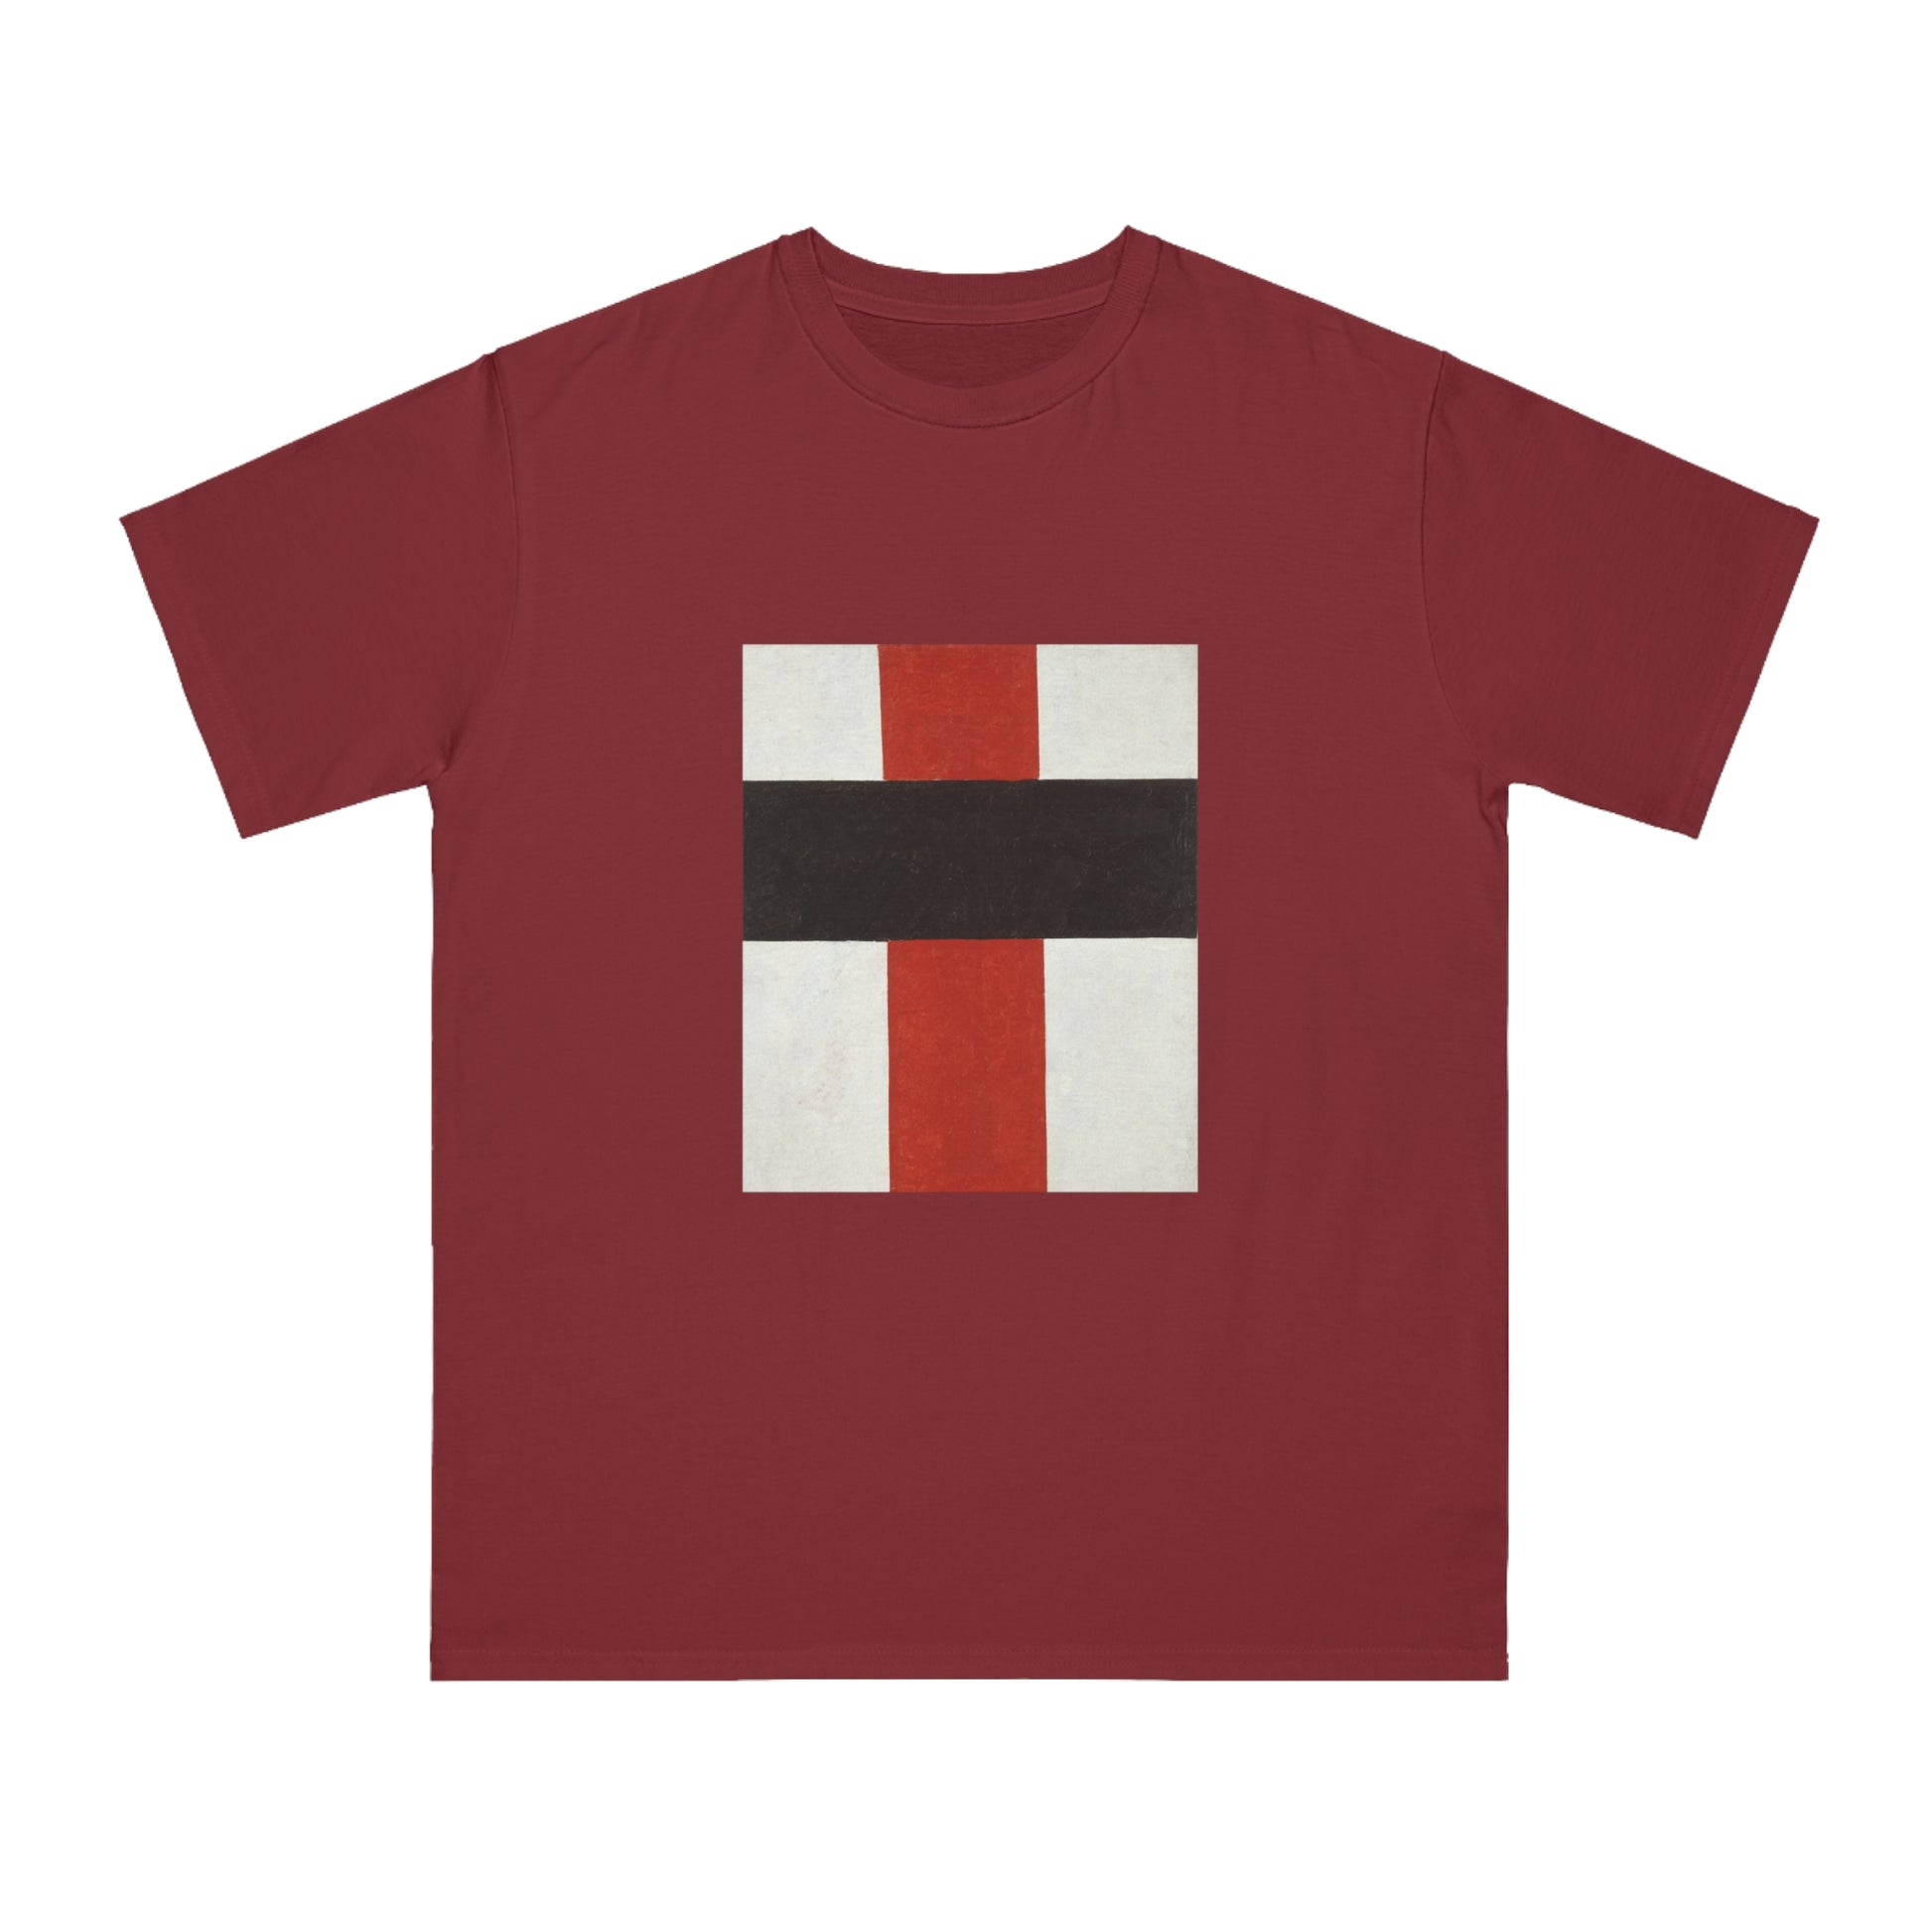 KAZIMIR MALEVICH - LARGE CROSS IN BLACK OVER RED ON WHITE - ORGANIC CLASSIC UNISEX T-SHIRT